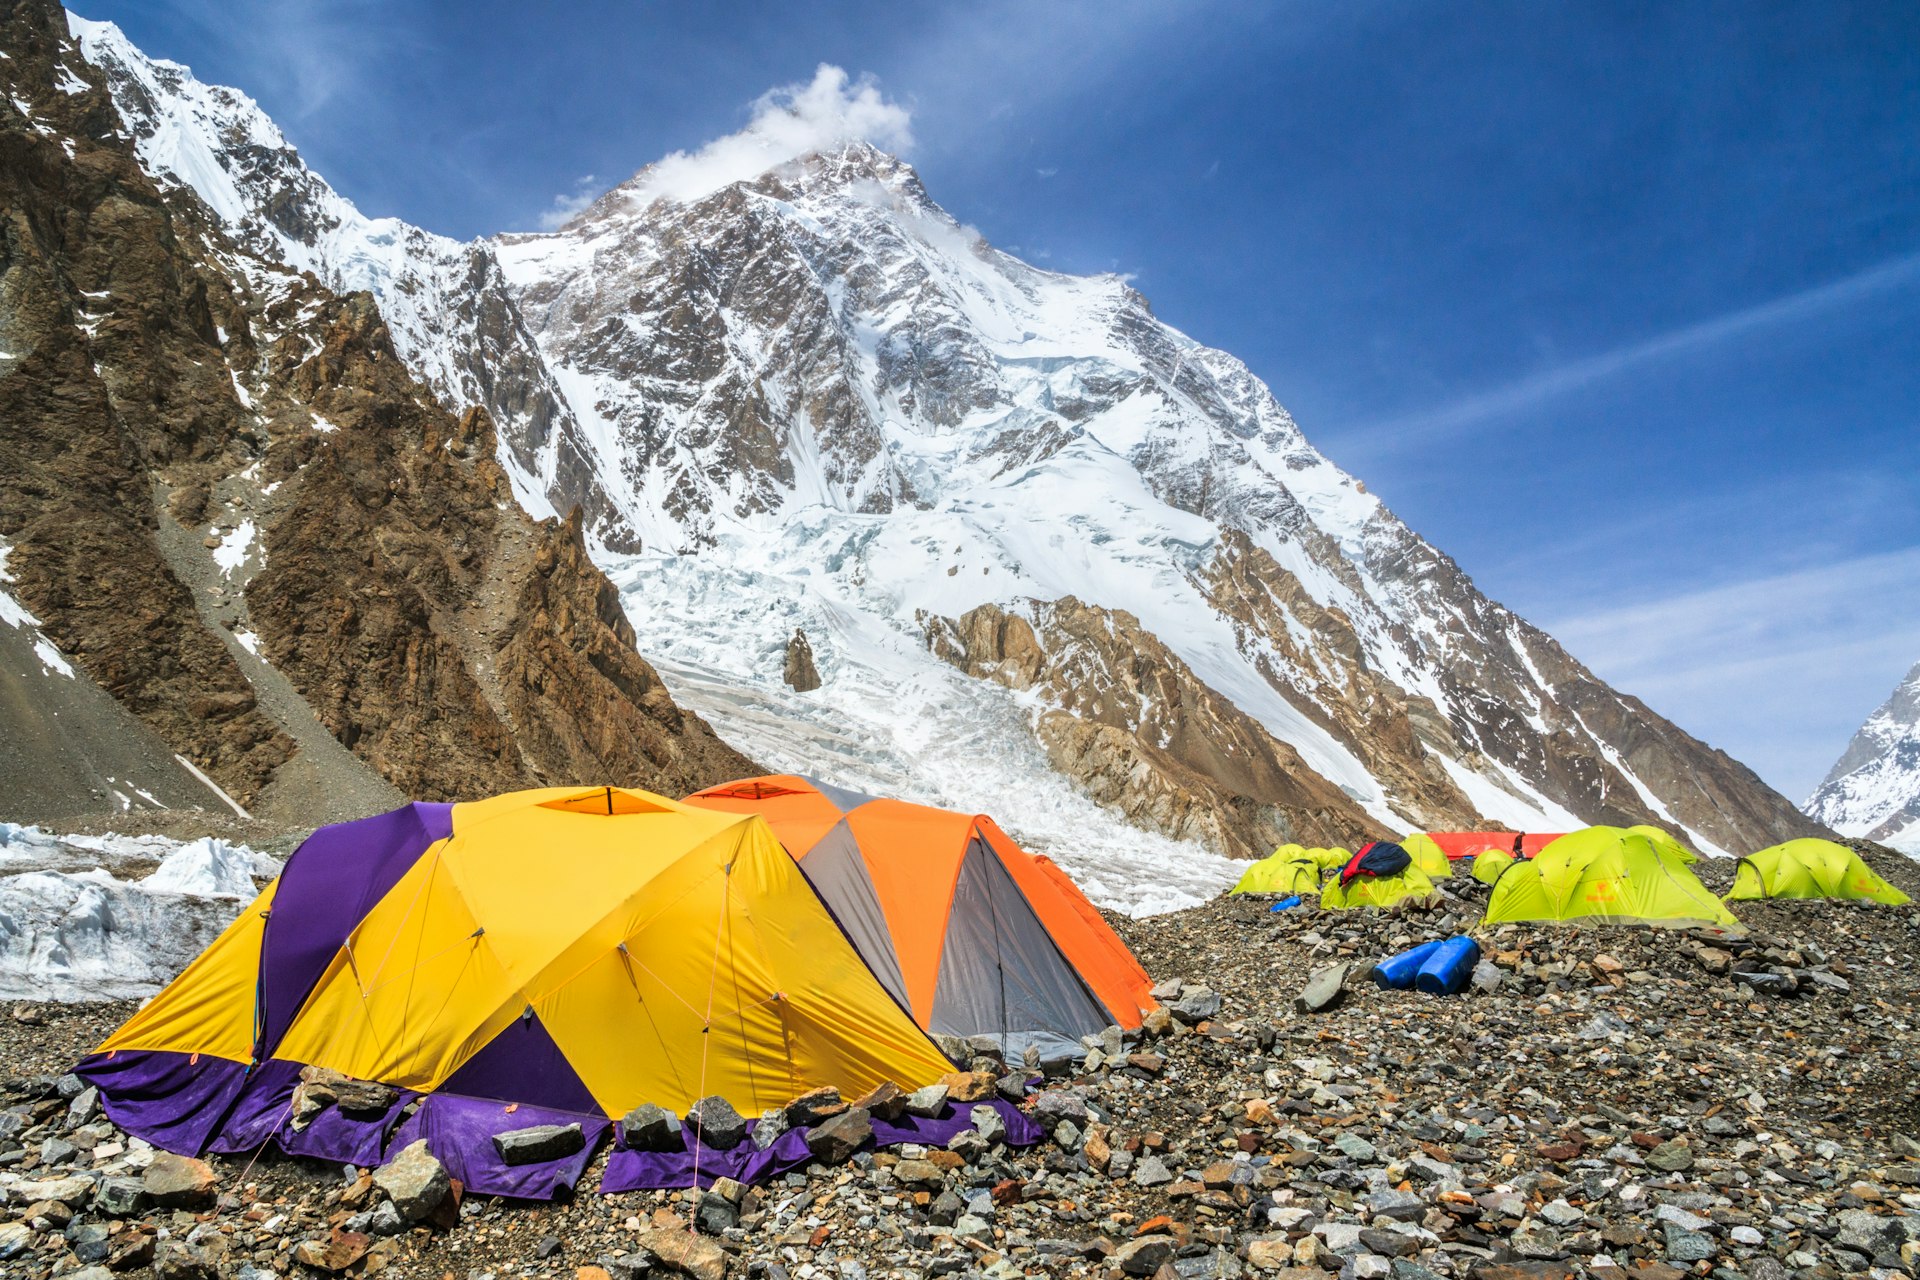 Tents at K2 Base Camp in Baltistan, Pakistan